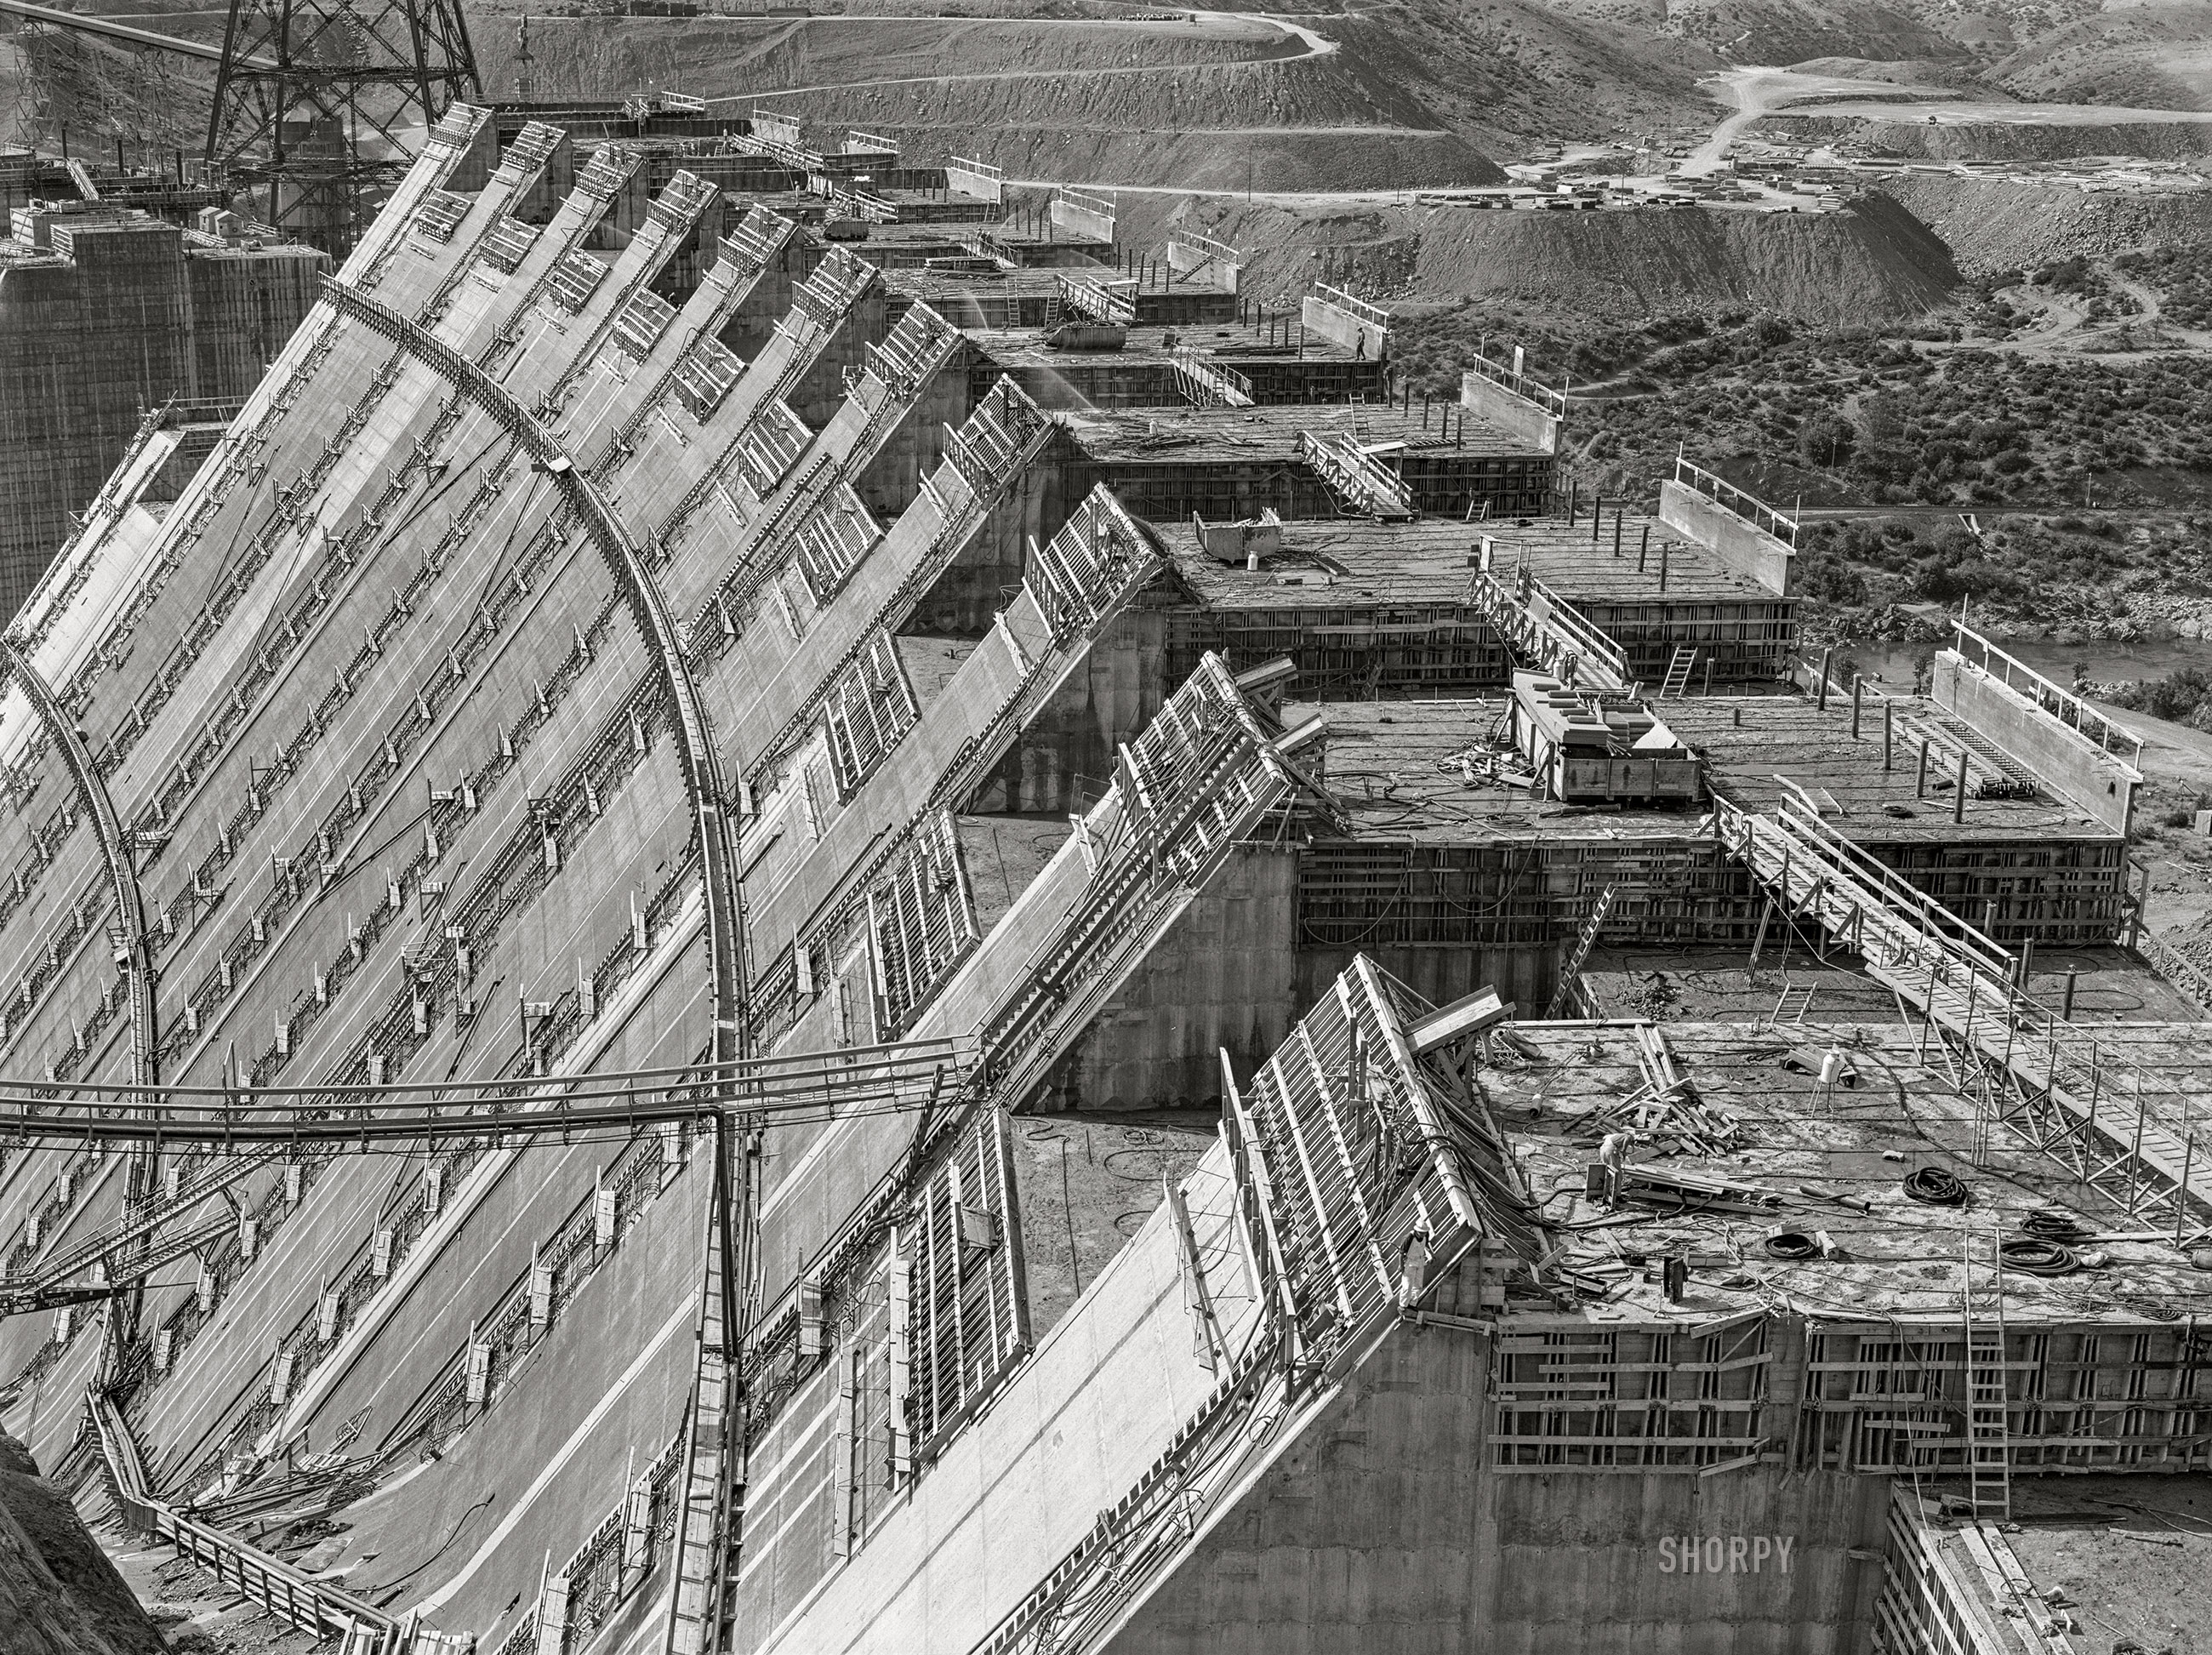 June 1942. "Shasta Dam, Shasta County, California. The dam under construction." Medium format acetate negative by Russell Lee for the Office of War Information. View full size.